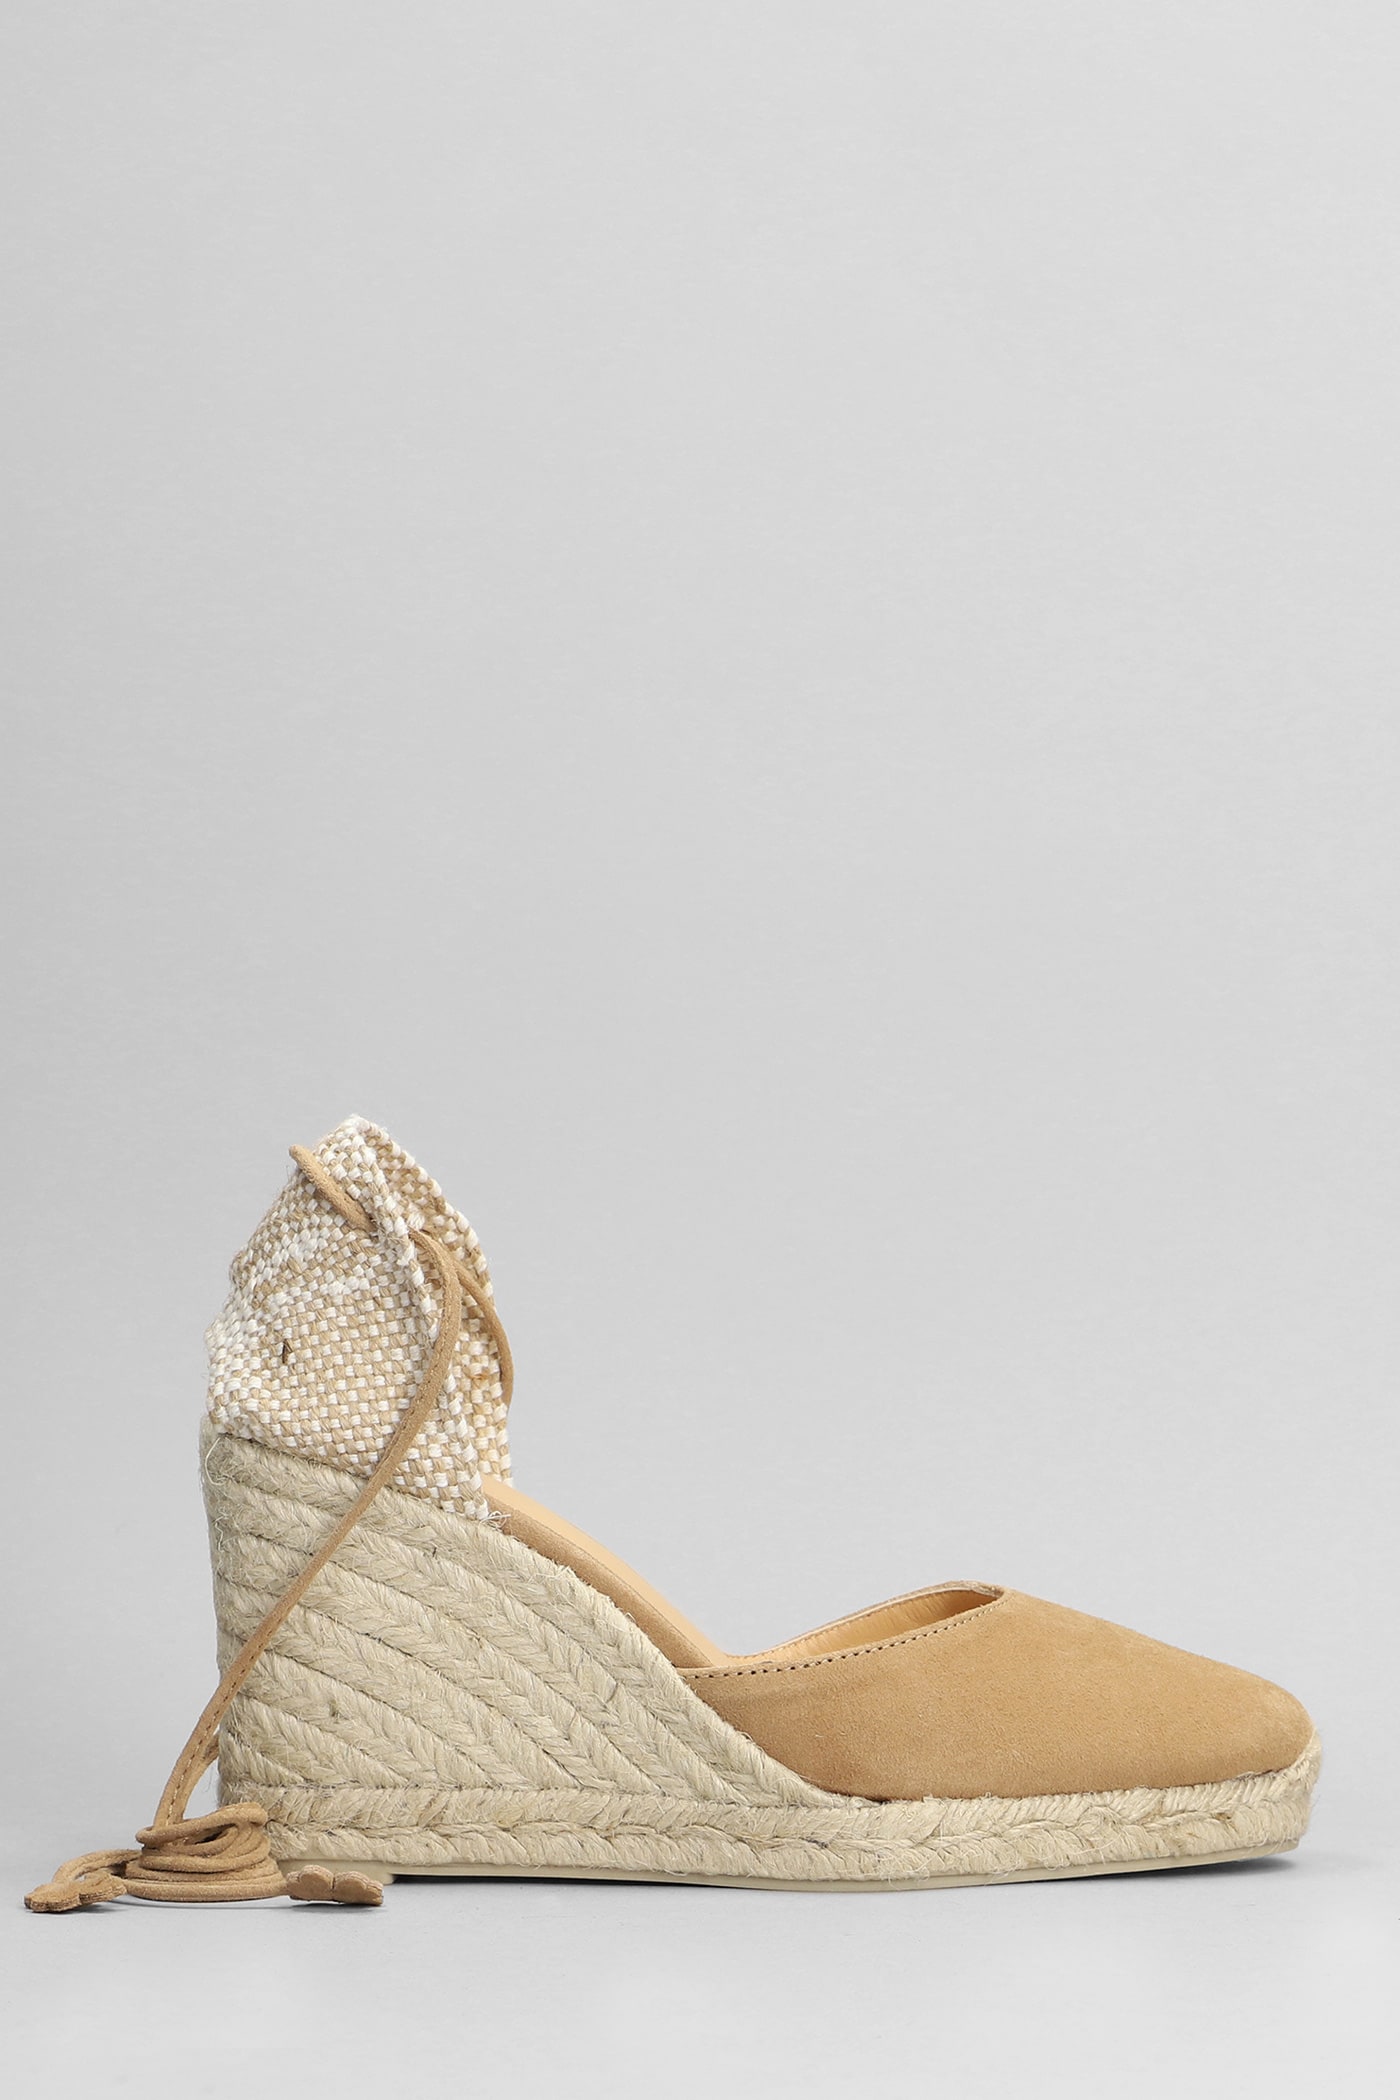 Castañer Carina-8-007 Wedges In Leather Color Suede